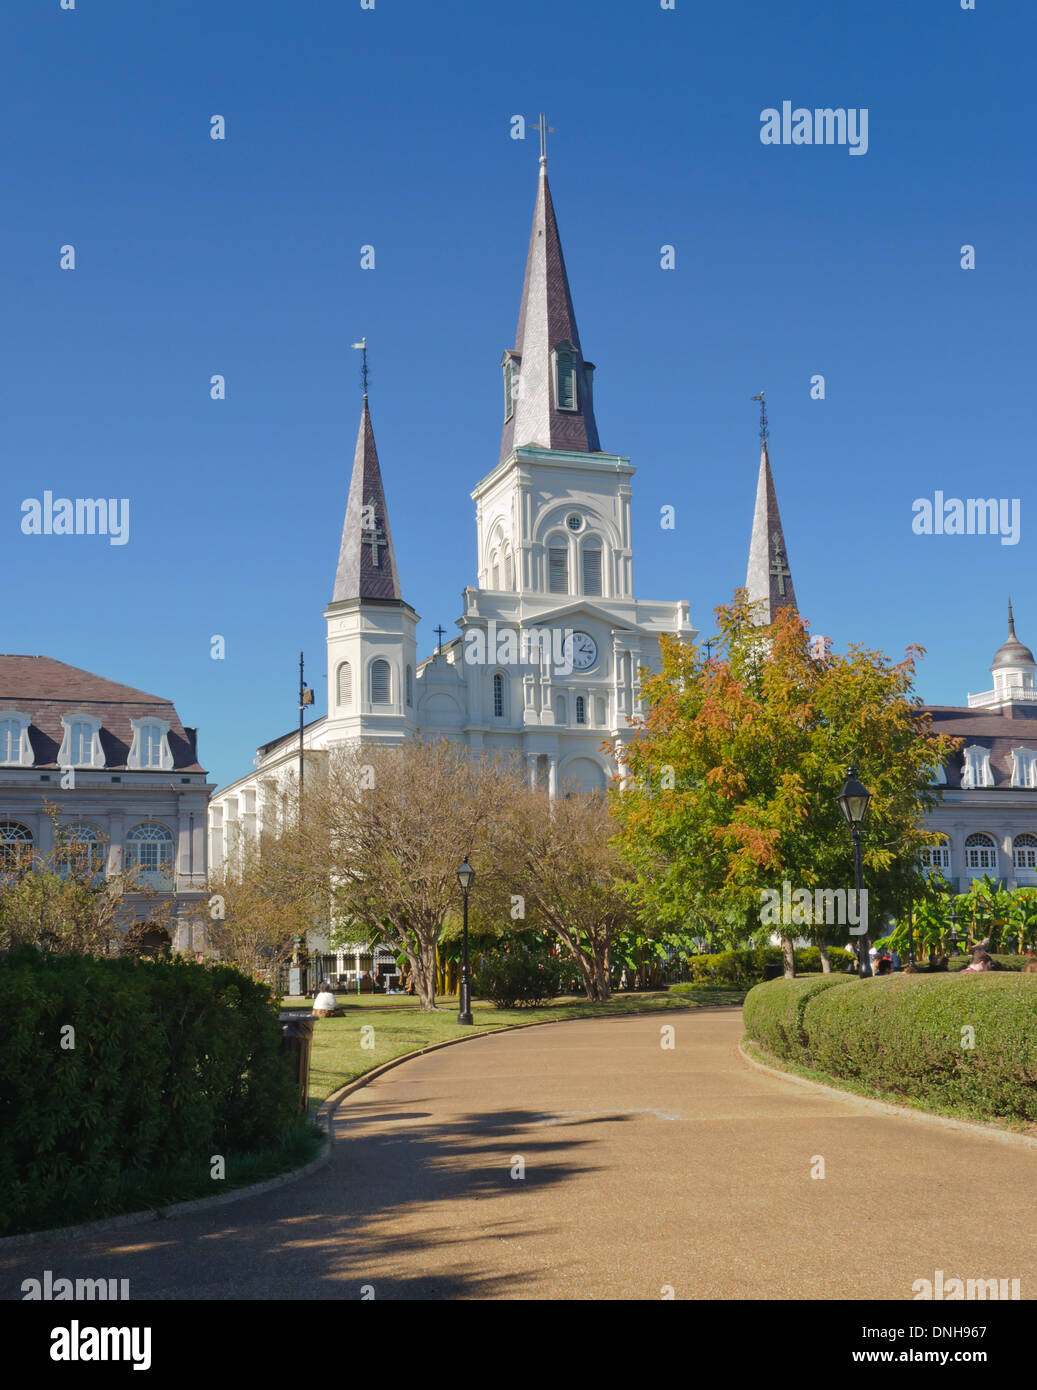 View of St. Louis Cathedral, Cabildo, and Presbytere from Jackson Square Park Stock Photo